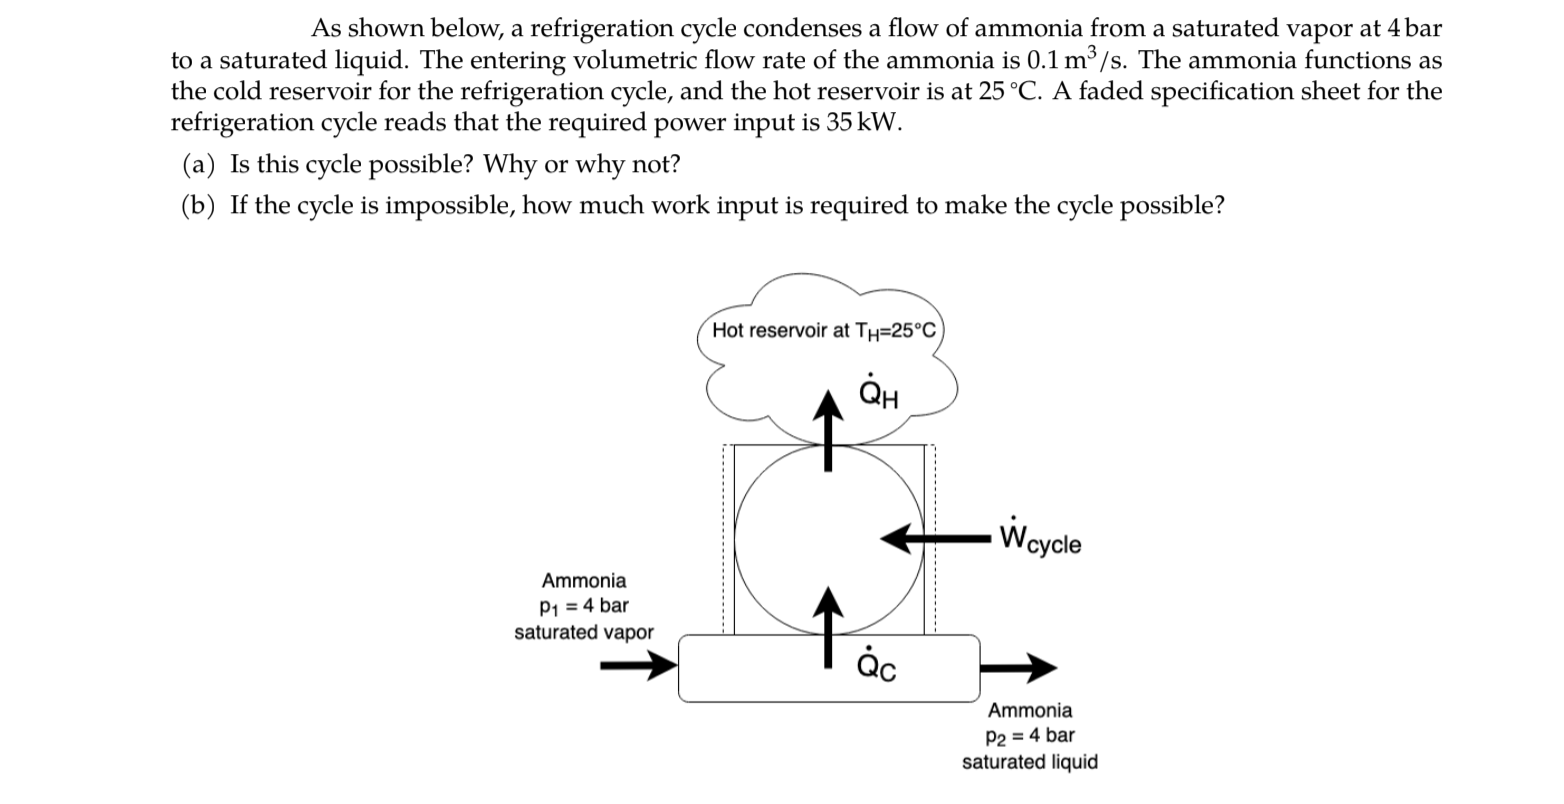 As shown below, a refrigeration cycle condenses a flow of ammonia from a saturated vapor at 4 bar
to a saturated liquid. The entering volumetric flow rate of the ammonia is 0.1 m³ /s. The ammonia functions as
the cold reservoir for the refrigeration cycle, and the hot reservoir is at 25 °C. A faded specification sheet for the
refrigeration cycle reads that the required power input is 35 kW.
(a) Is this cycle possible? Why or why not?
(b) If the cycle is impossible, how much work input is required to make the cycle possible?
Hot reservoir at TH=25°C
Woydle
Ammonia
P1 = 4 bar
saturated vapor
ác
Ammonia
P2 = 4 bar
saturated liquid
